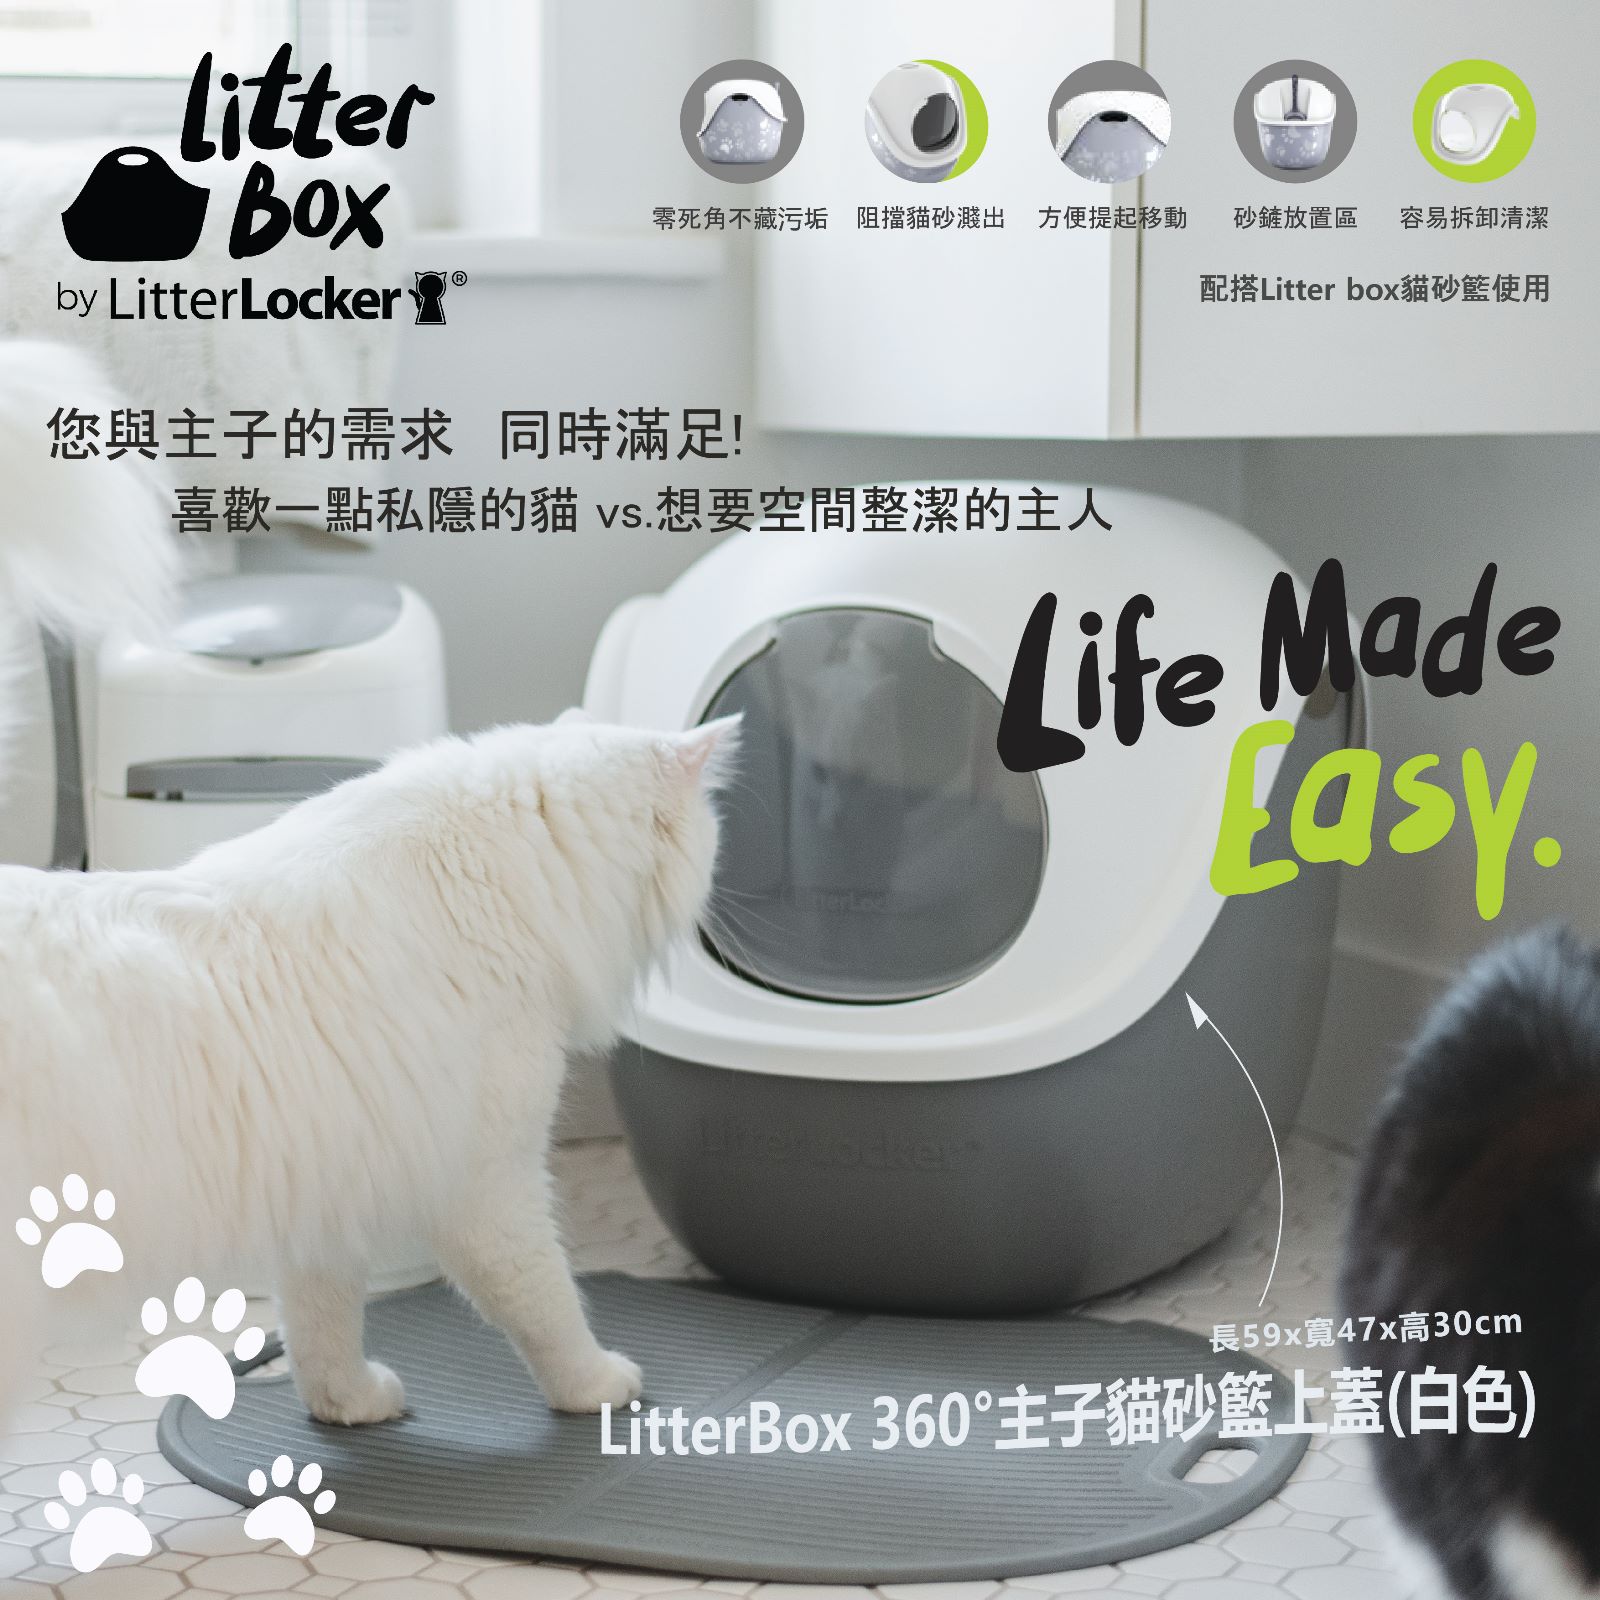 litterlocker-cat-litter-box-cover-intro.jp..<p><strong>價格: $198.00</strong> </p>]]></description>
			<content:encoded><![CDATA[<div style='float: right; padding: 10px;'><a href=